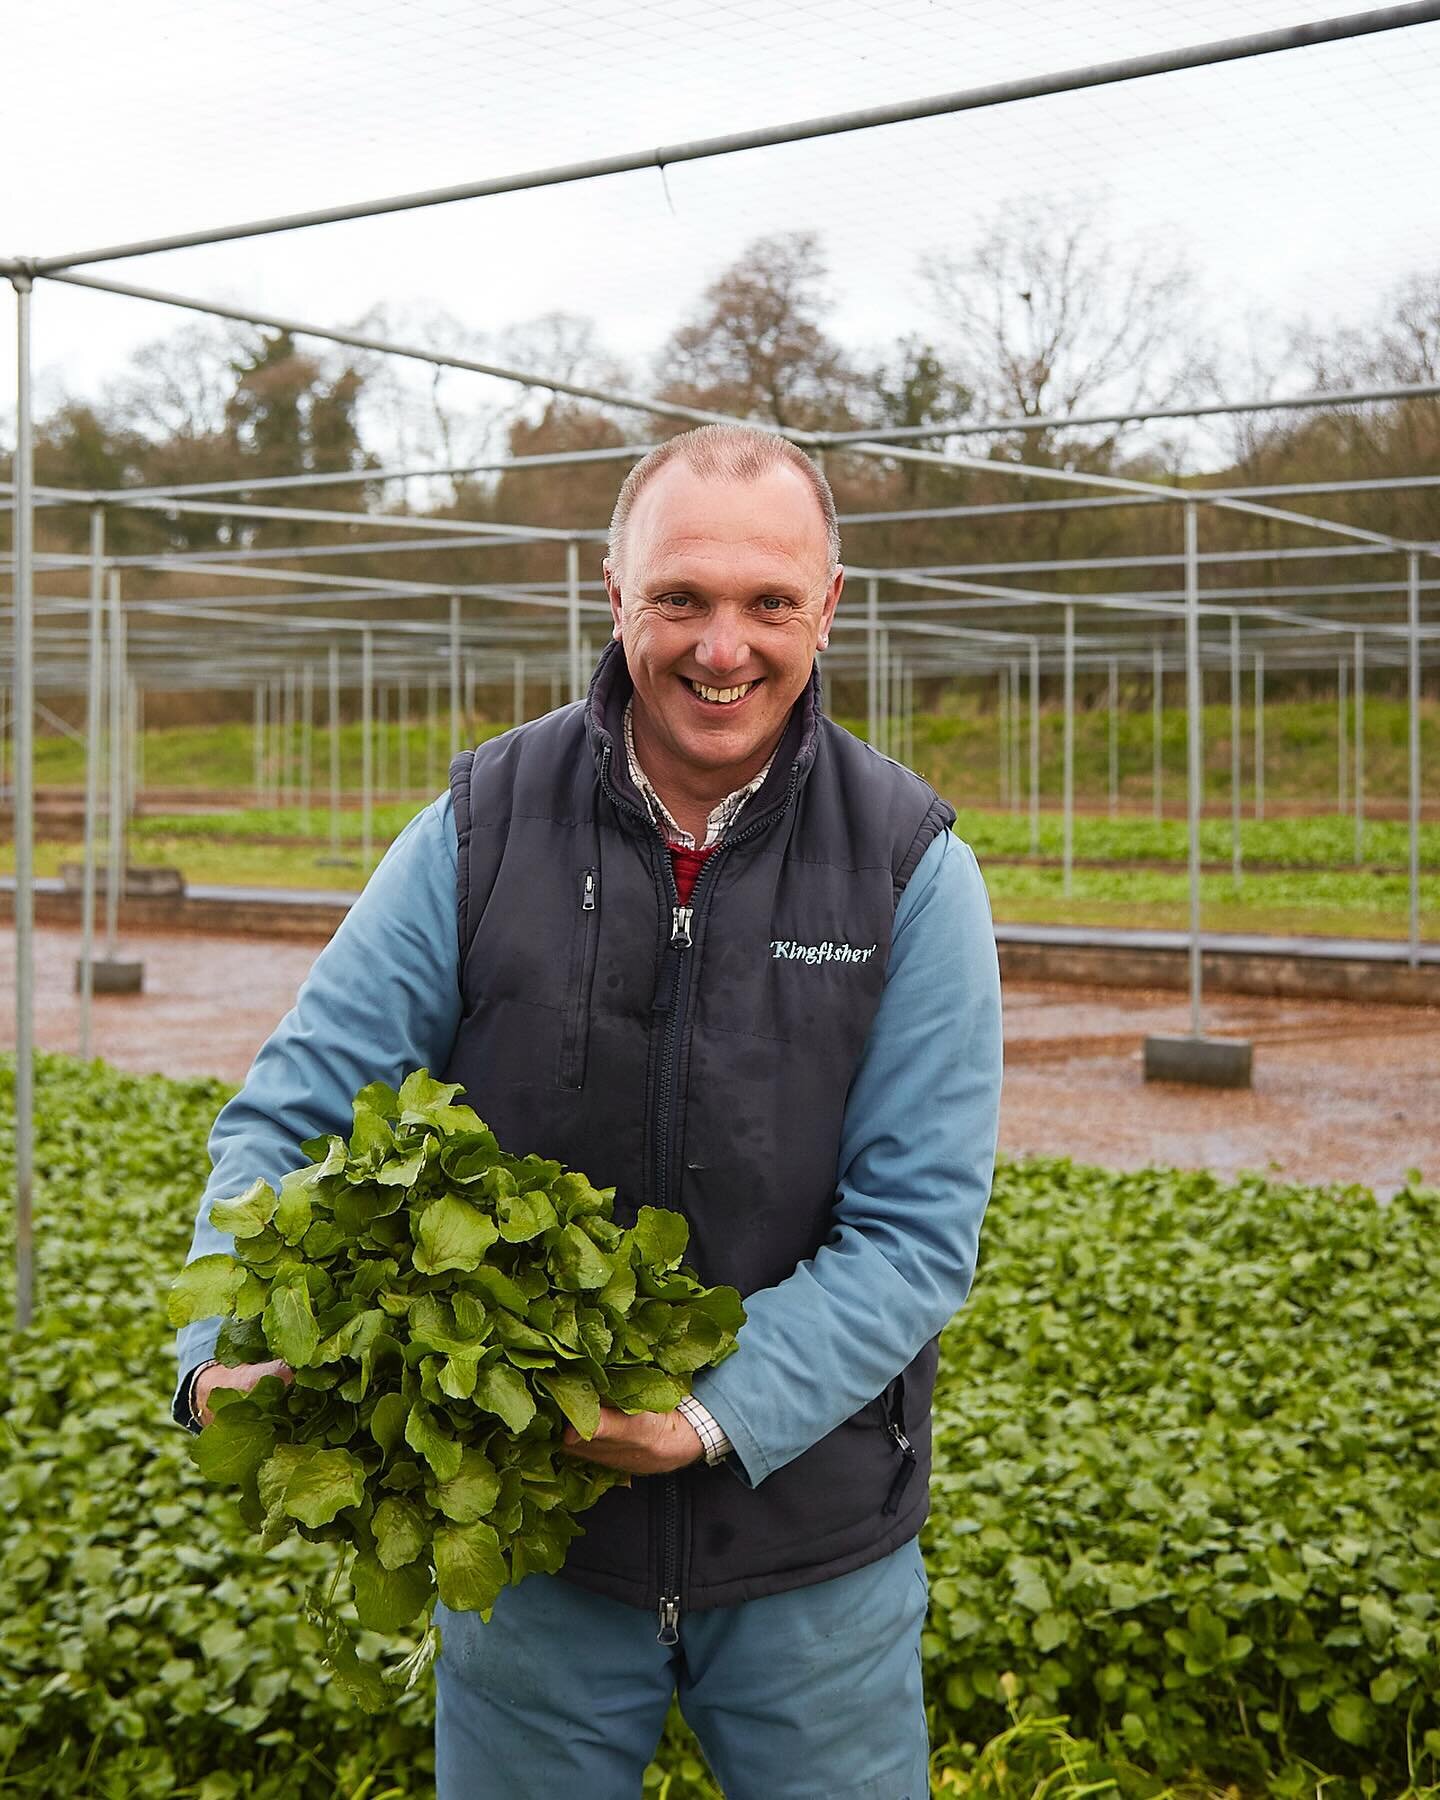 Hello April! You would be a fool not to enjoy our watercress! 

#aprilfools 
#april
#watercress 
#lovewatercress 
#watercressfarm 
#watercresslife 
#170years 
#growingwatercress 
#growninspringwater 
#pesticidesfree 
#traditionallygrown 
#itsaskill 
